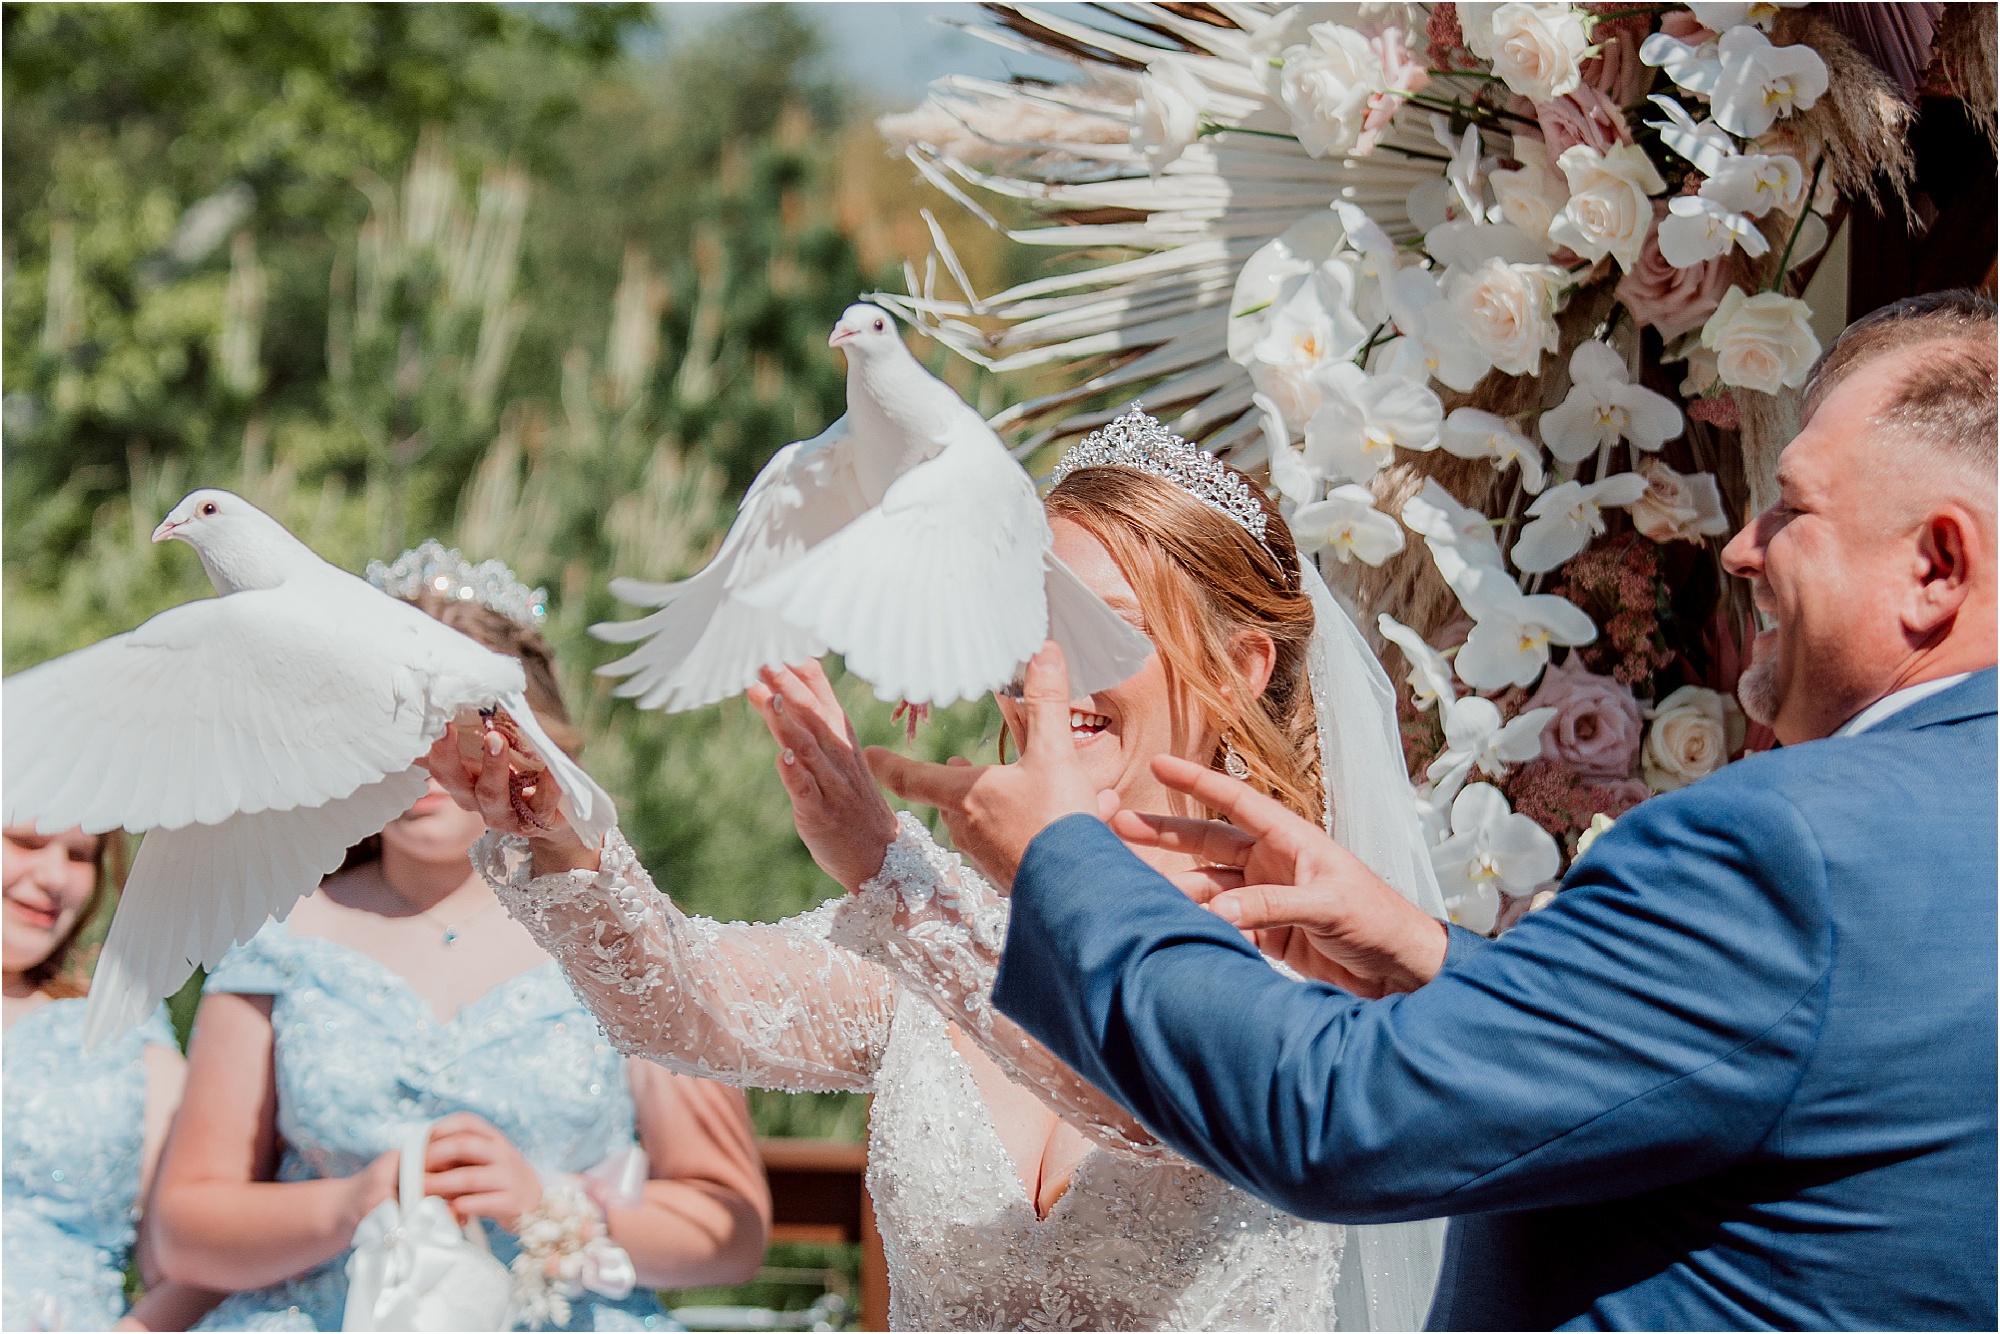 dove release at Fairytale Wedding